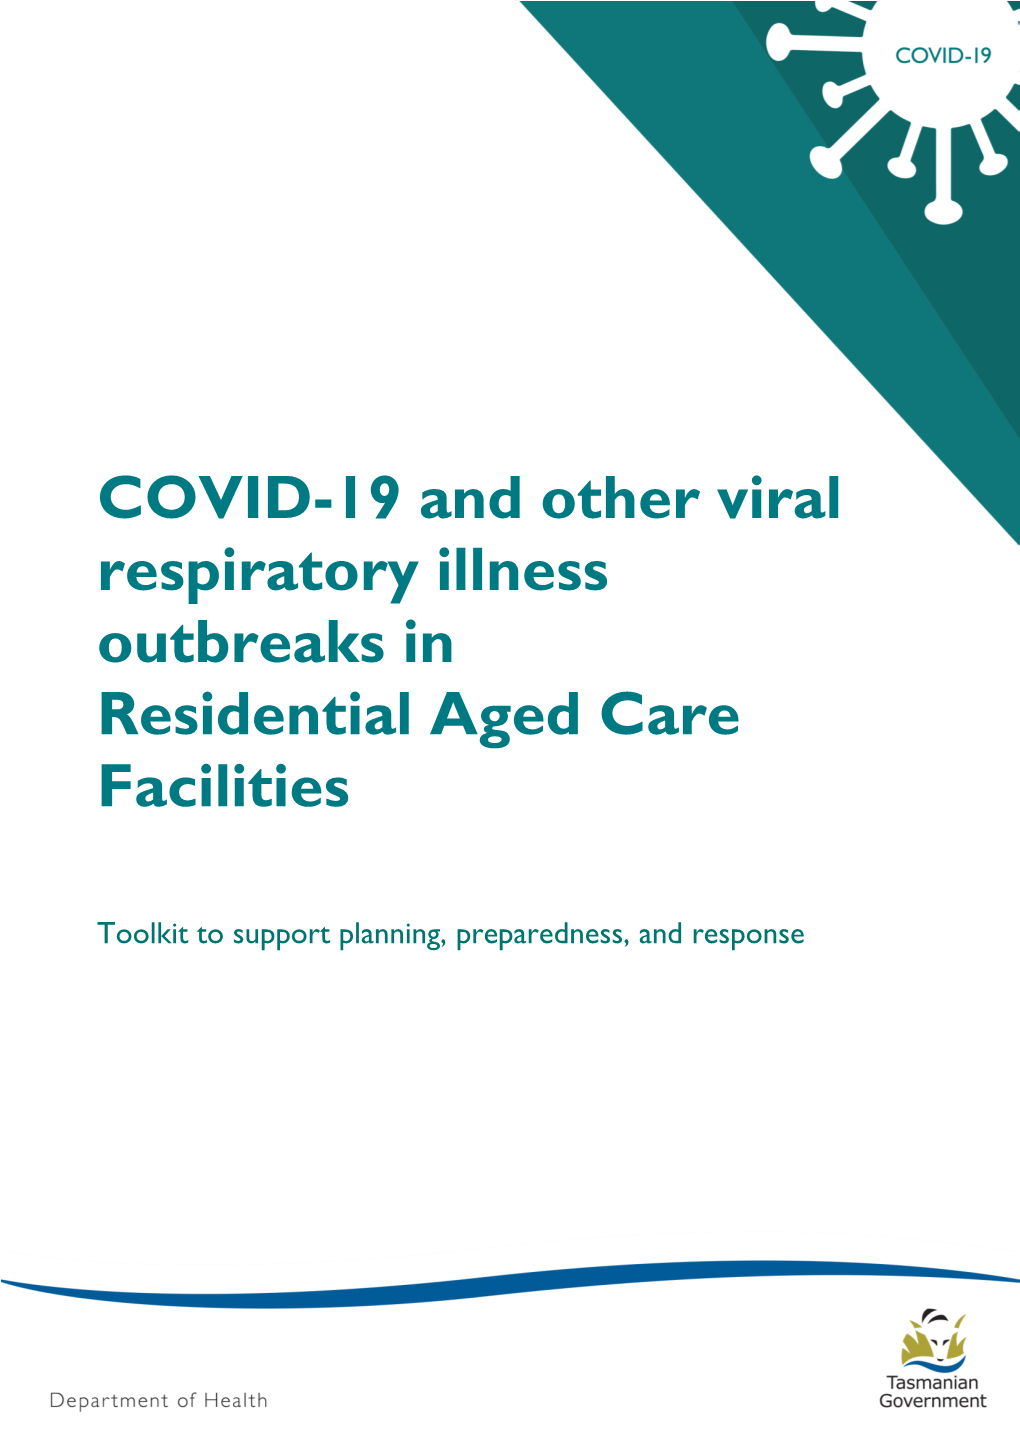 COVID-19 Outbreaks in Residential Aged Care Facilities